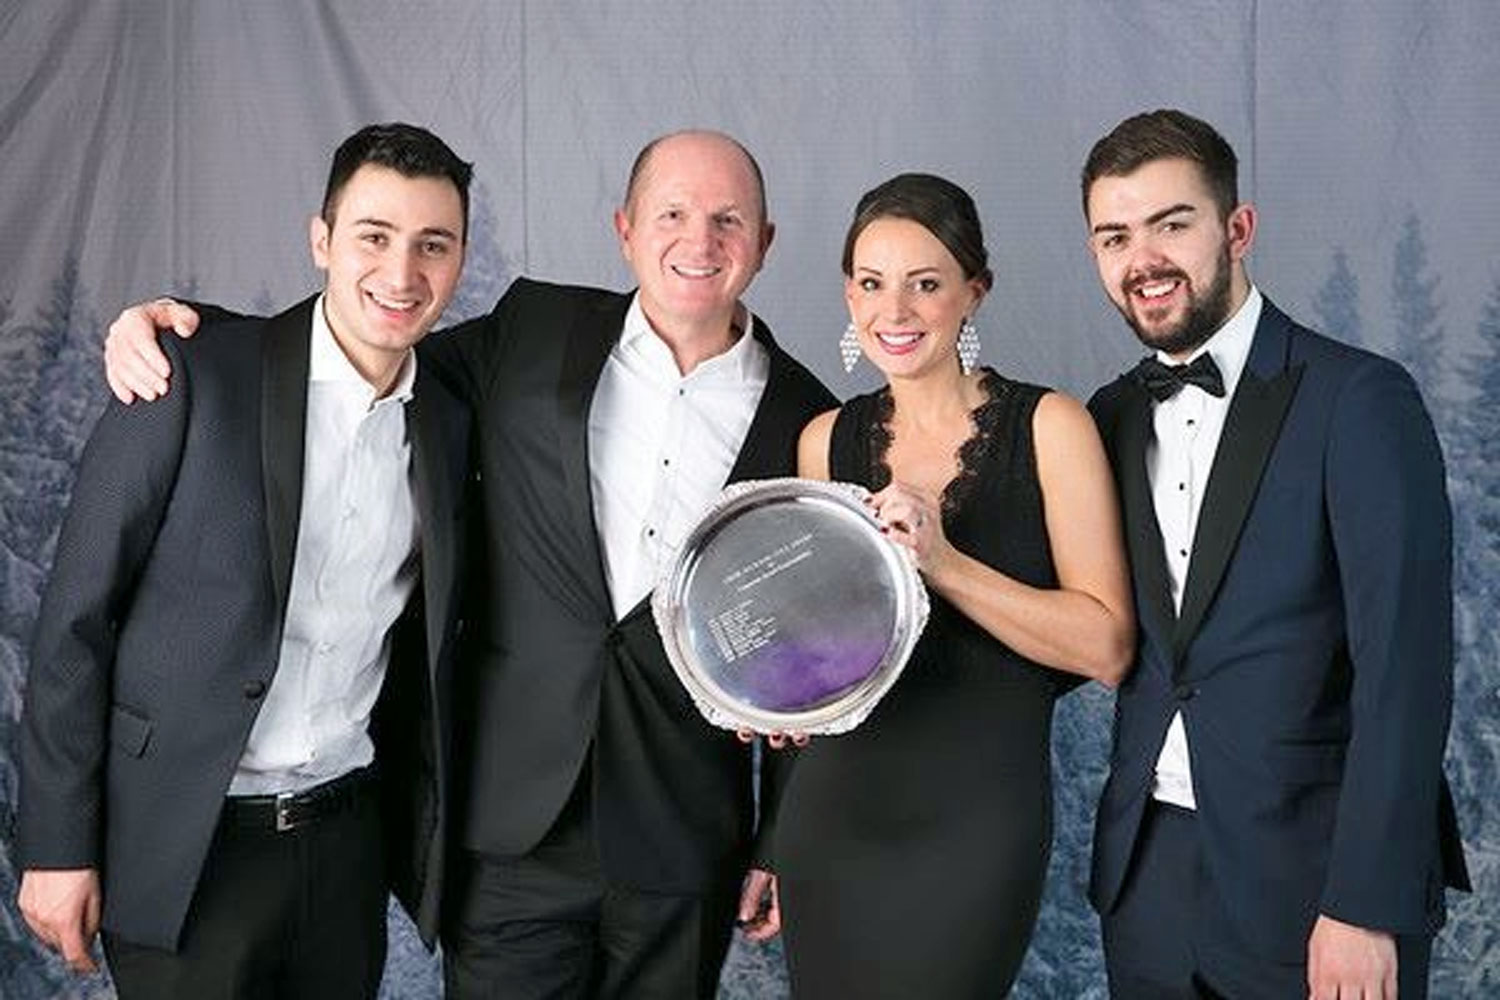 National champions - picking up the award are lettings negotiator Joe Gilman, Will Linley, Emily Wilkinson, and sales consultant Alex Atkinson